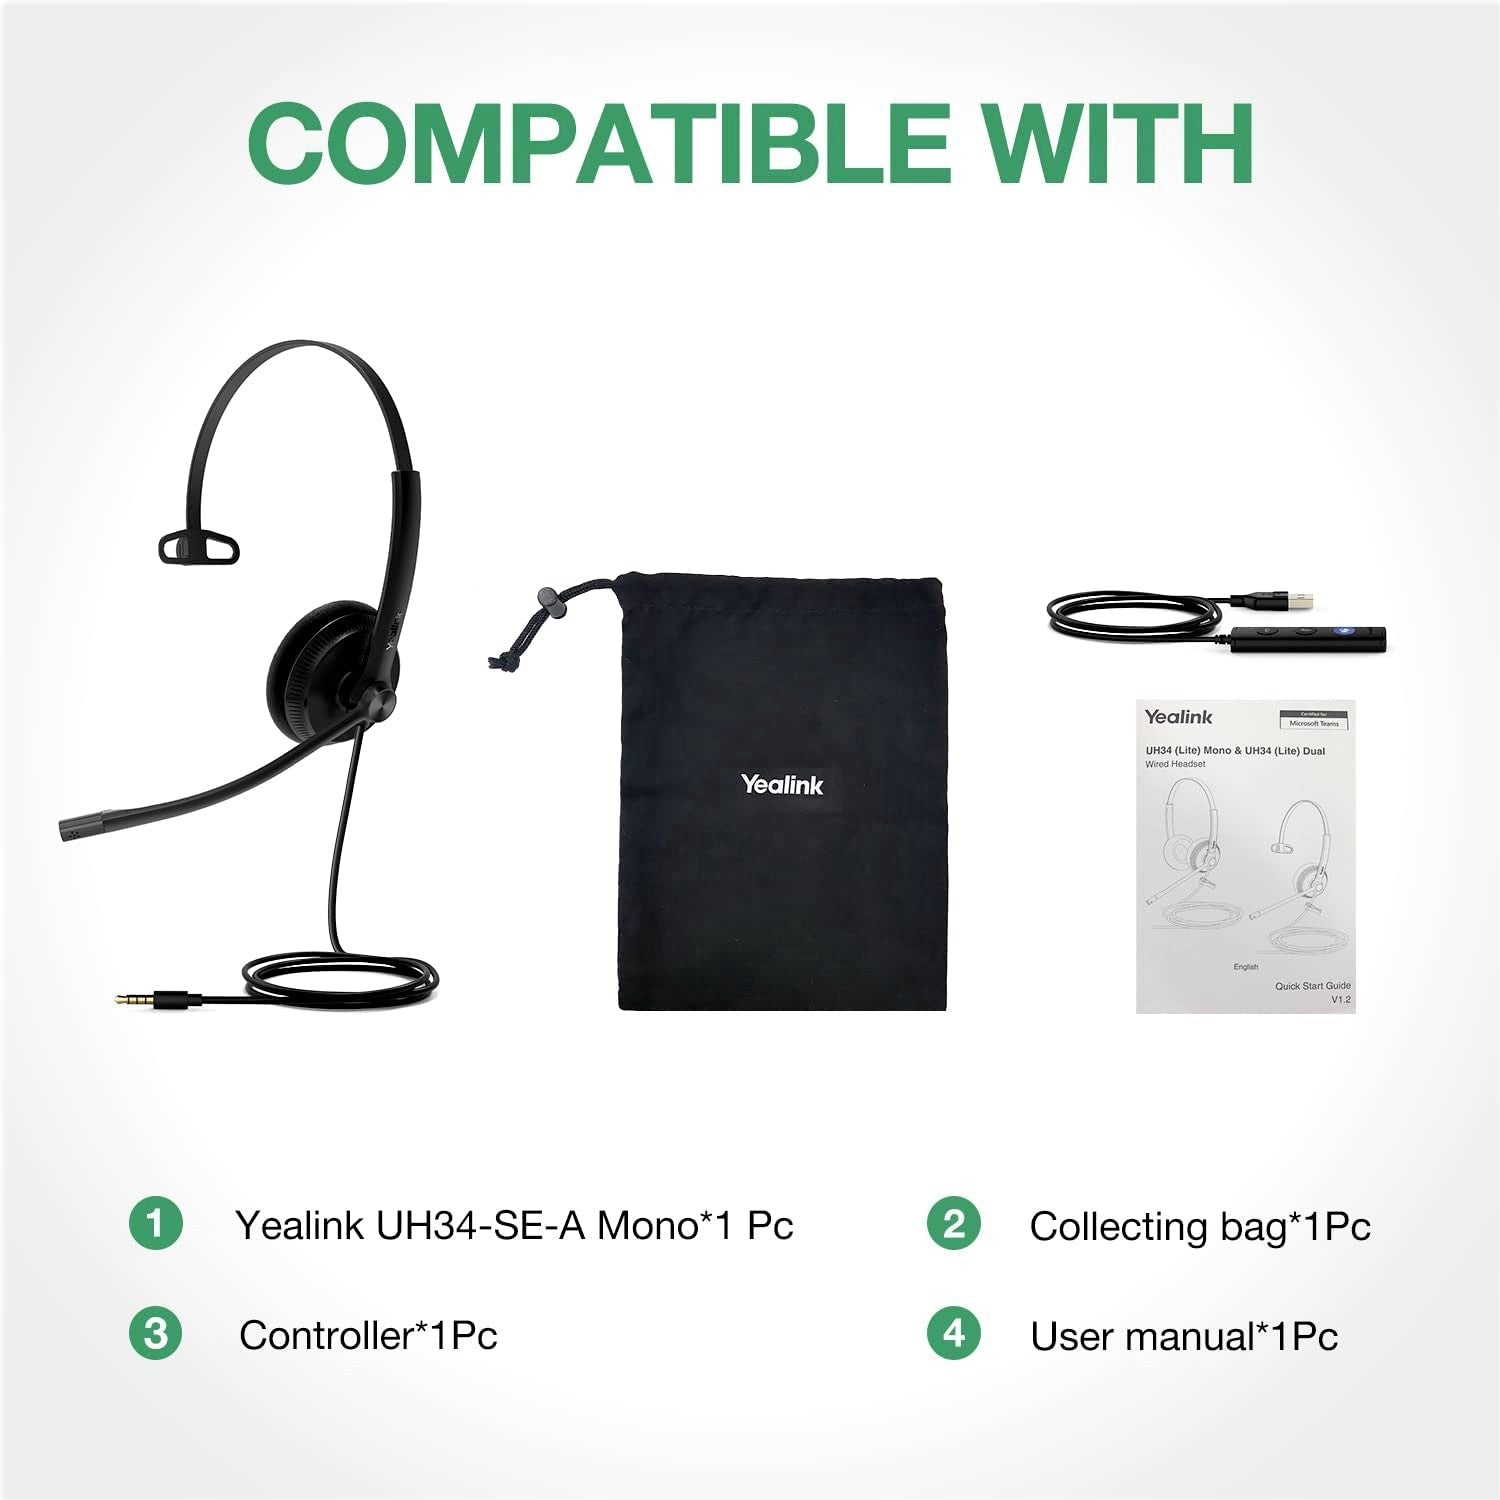 Yealink UH34 Mono USB Wired Headset - Features